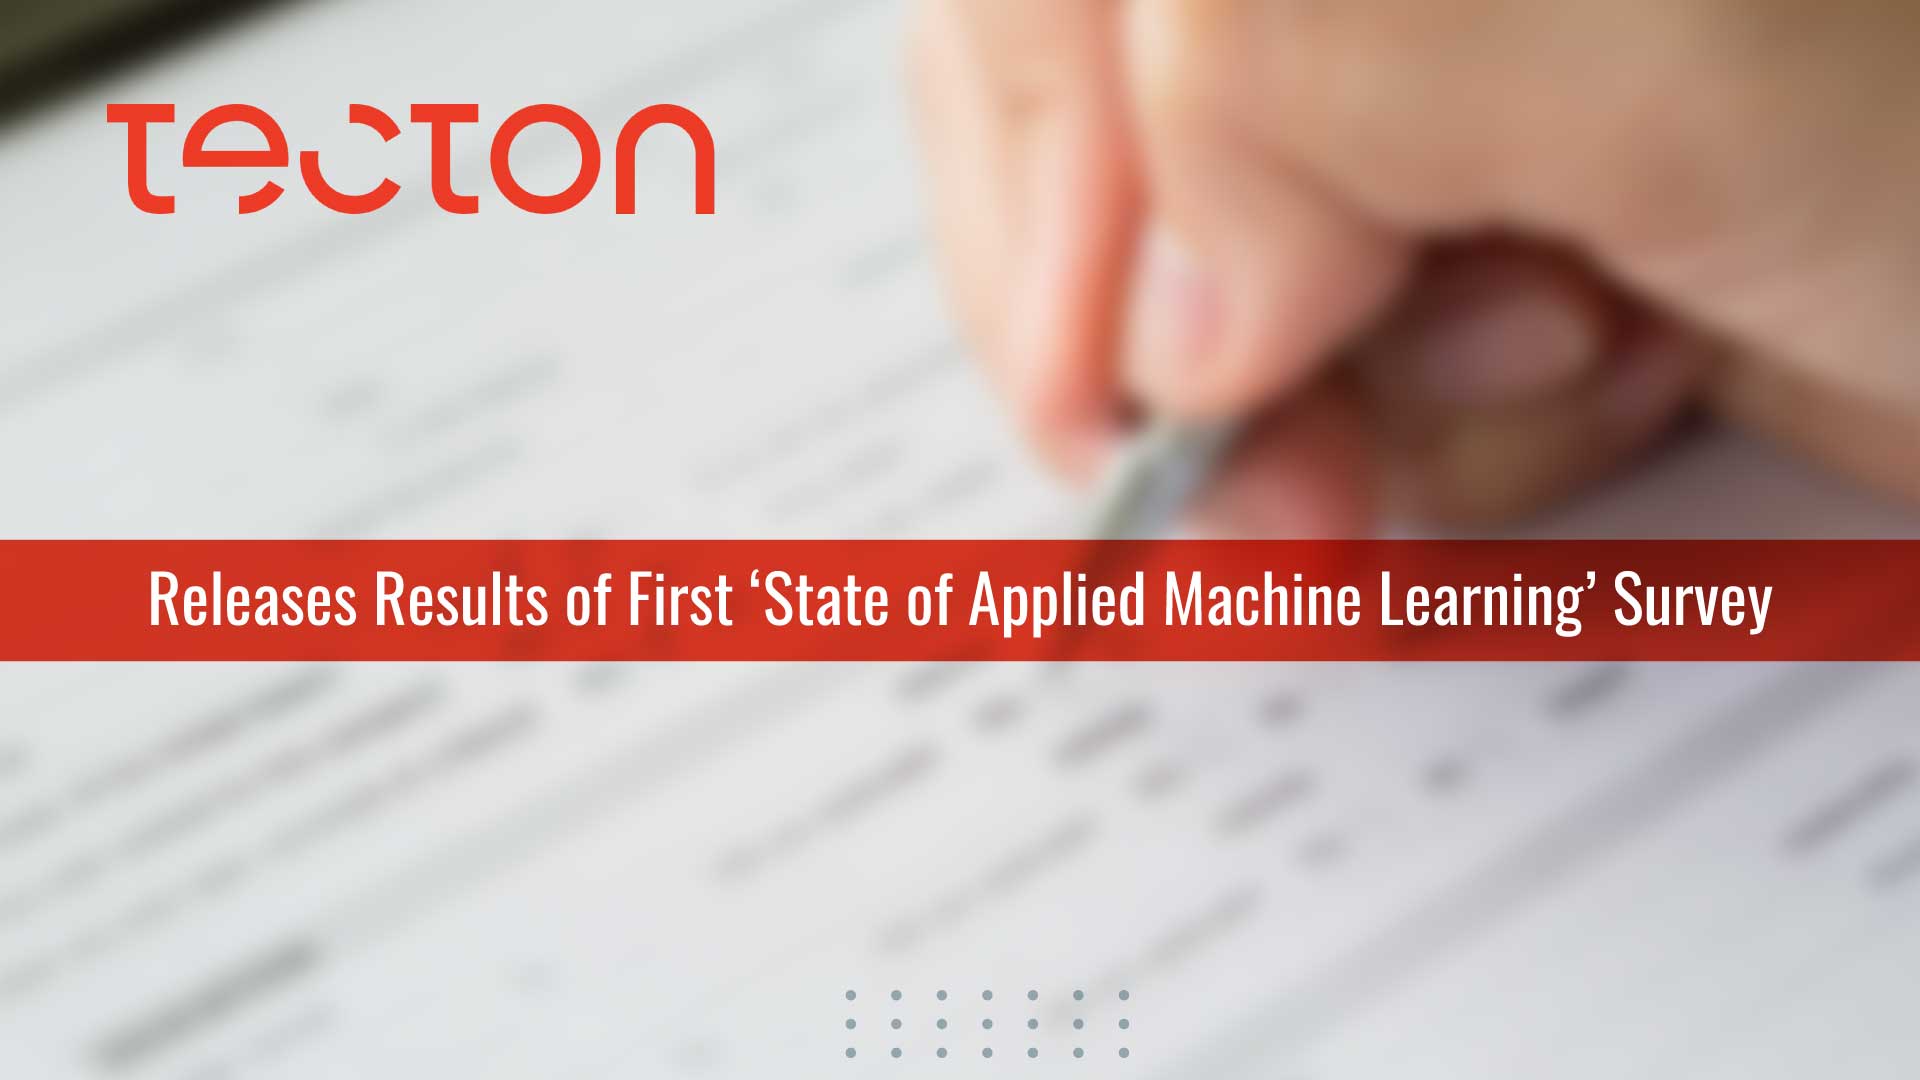 Tecton Releases Results of First ‘State of Applied Machine Learning’ Survey